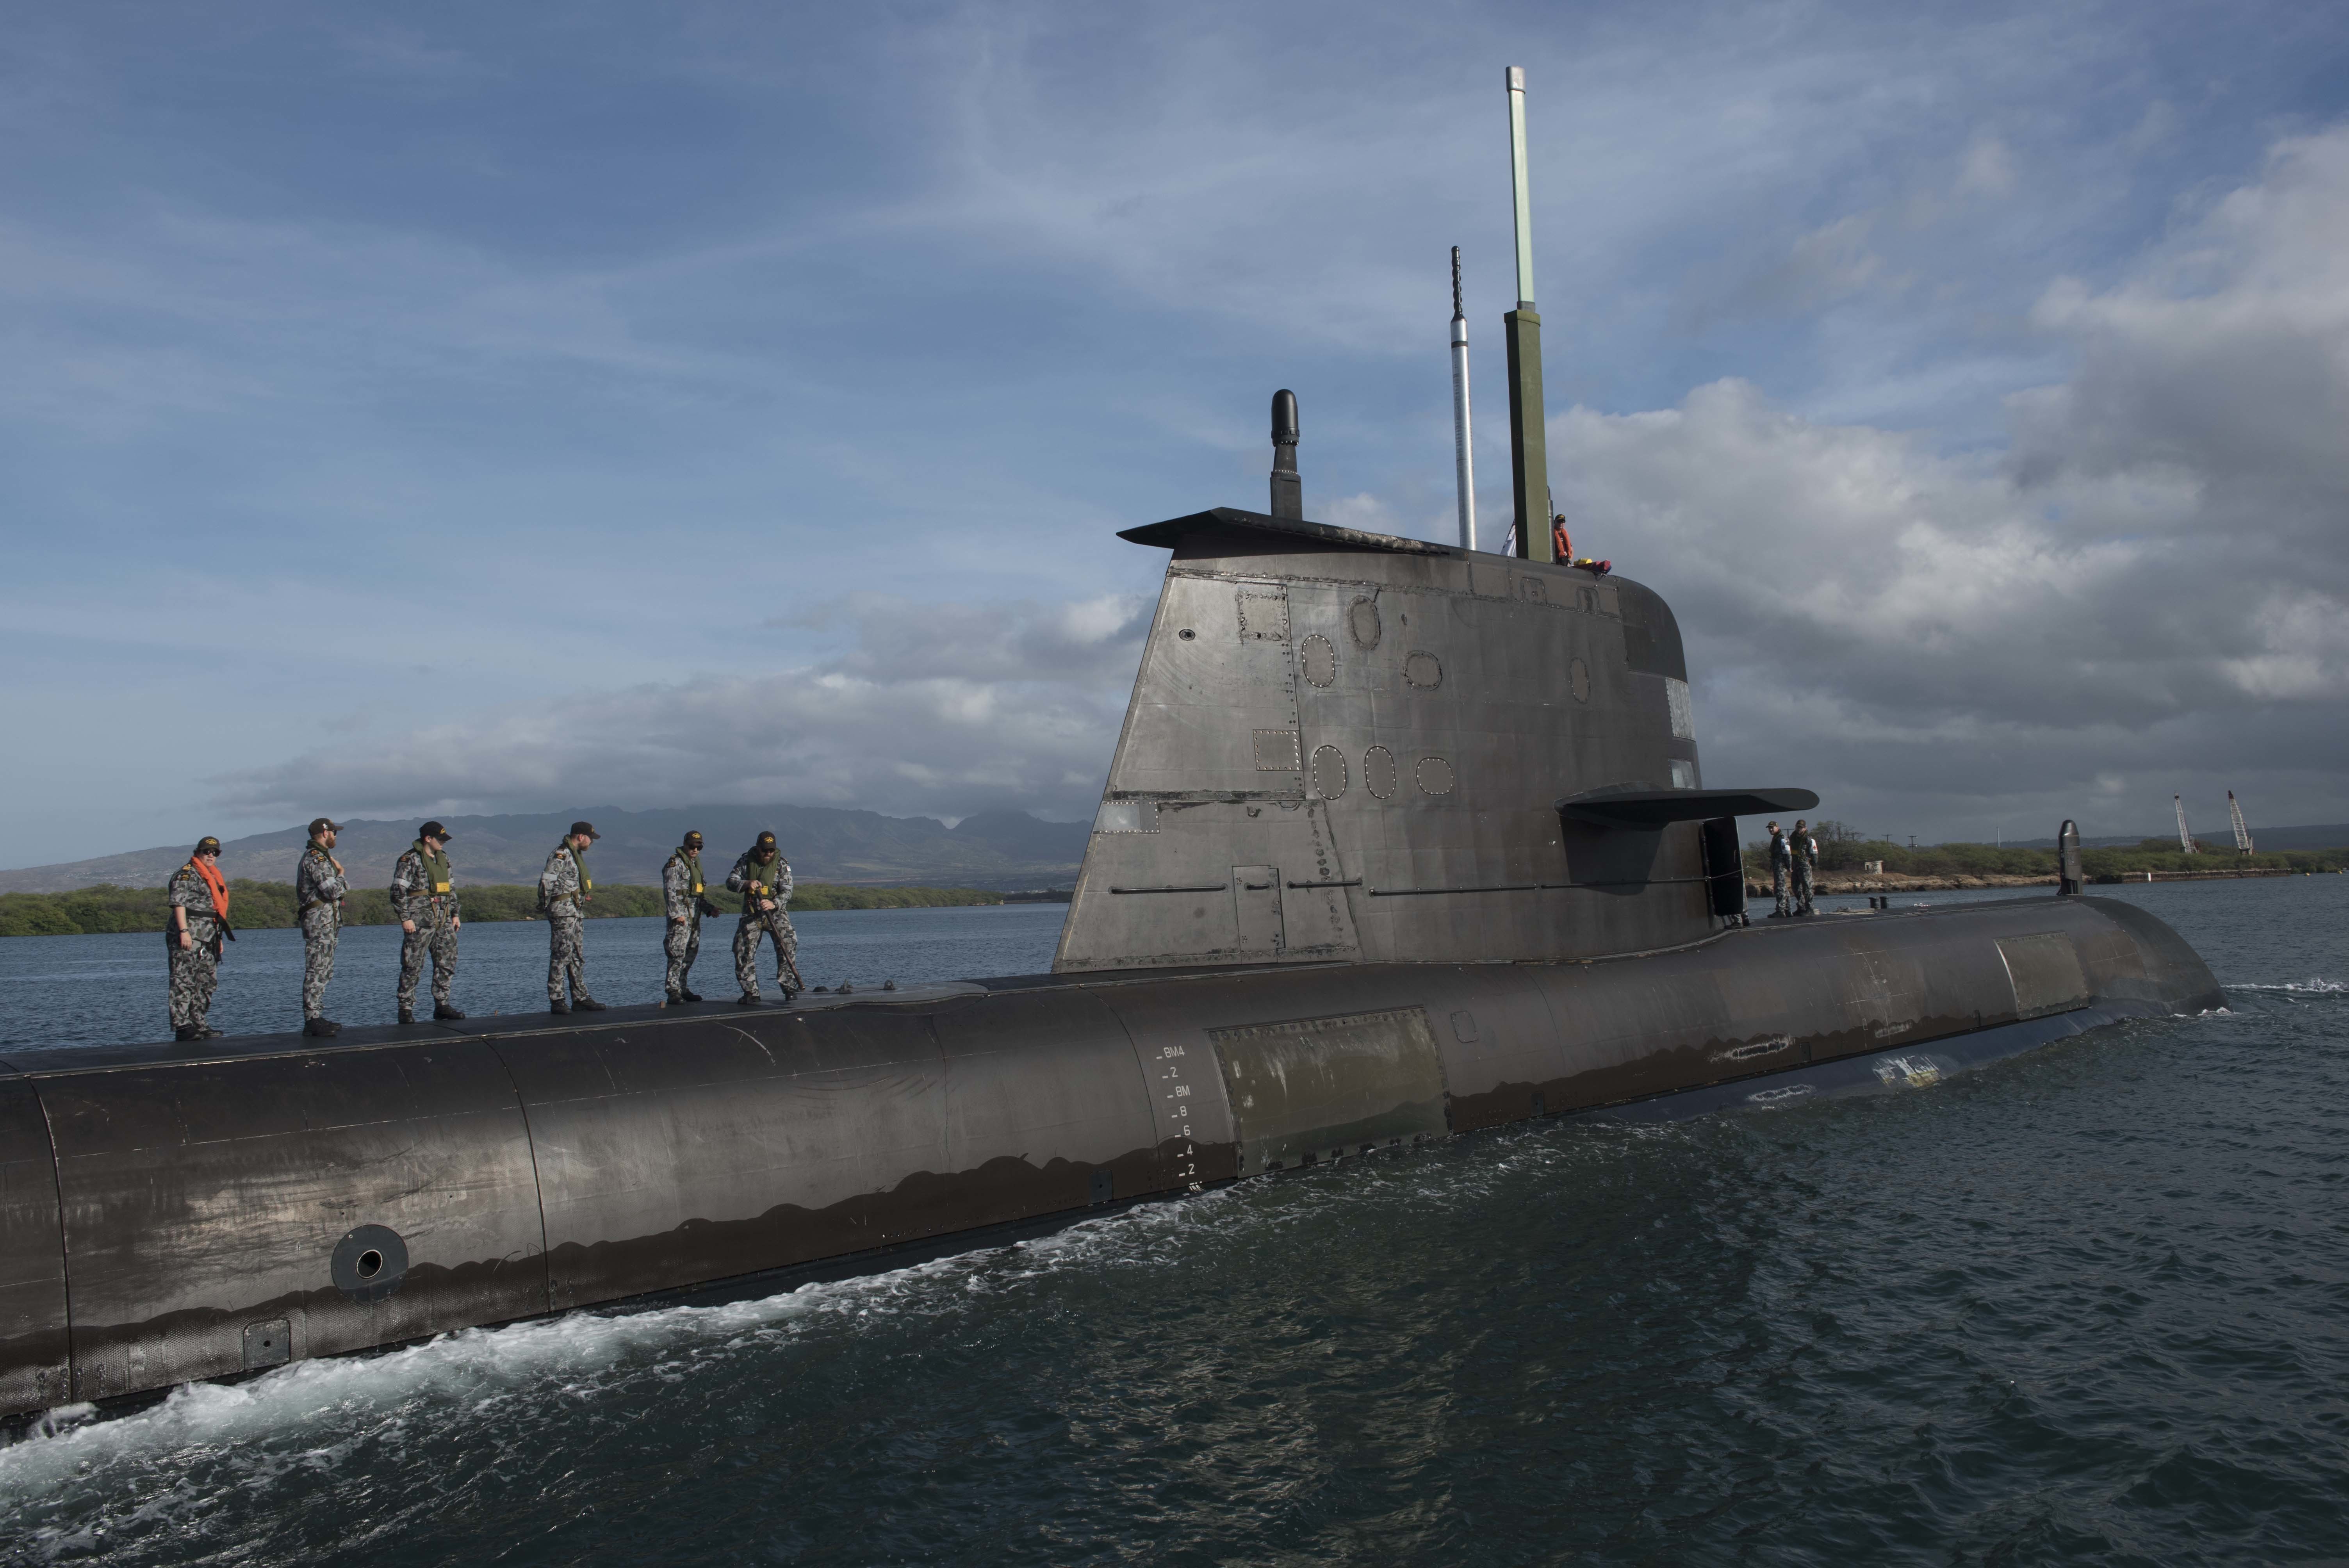 The crew of the Royal Australian Navy submarine HMAS Rankin stand on top of submarine while in the water.